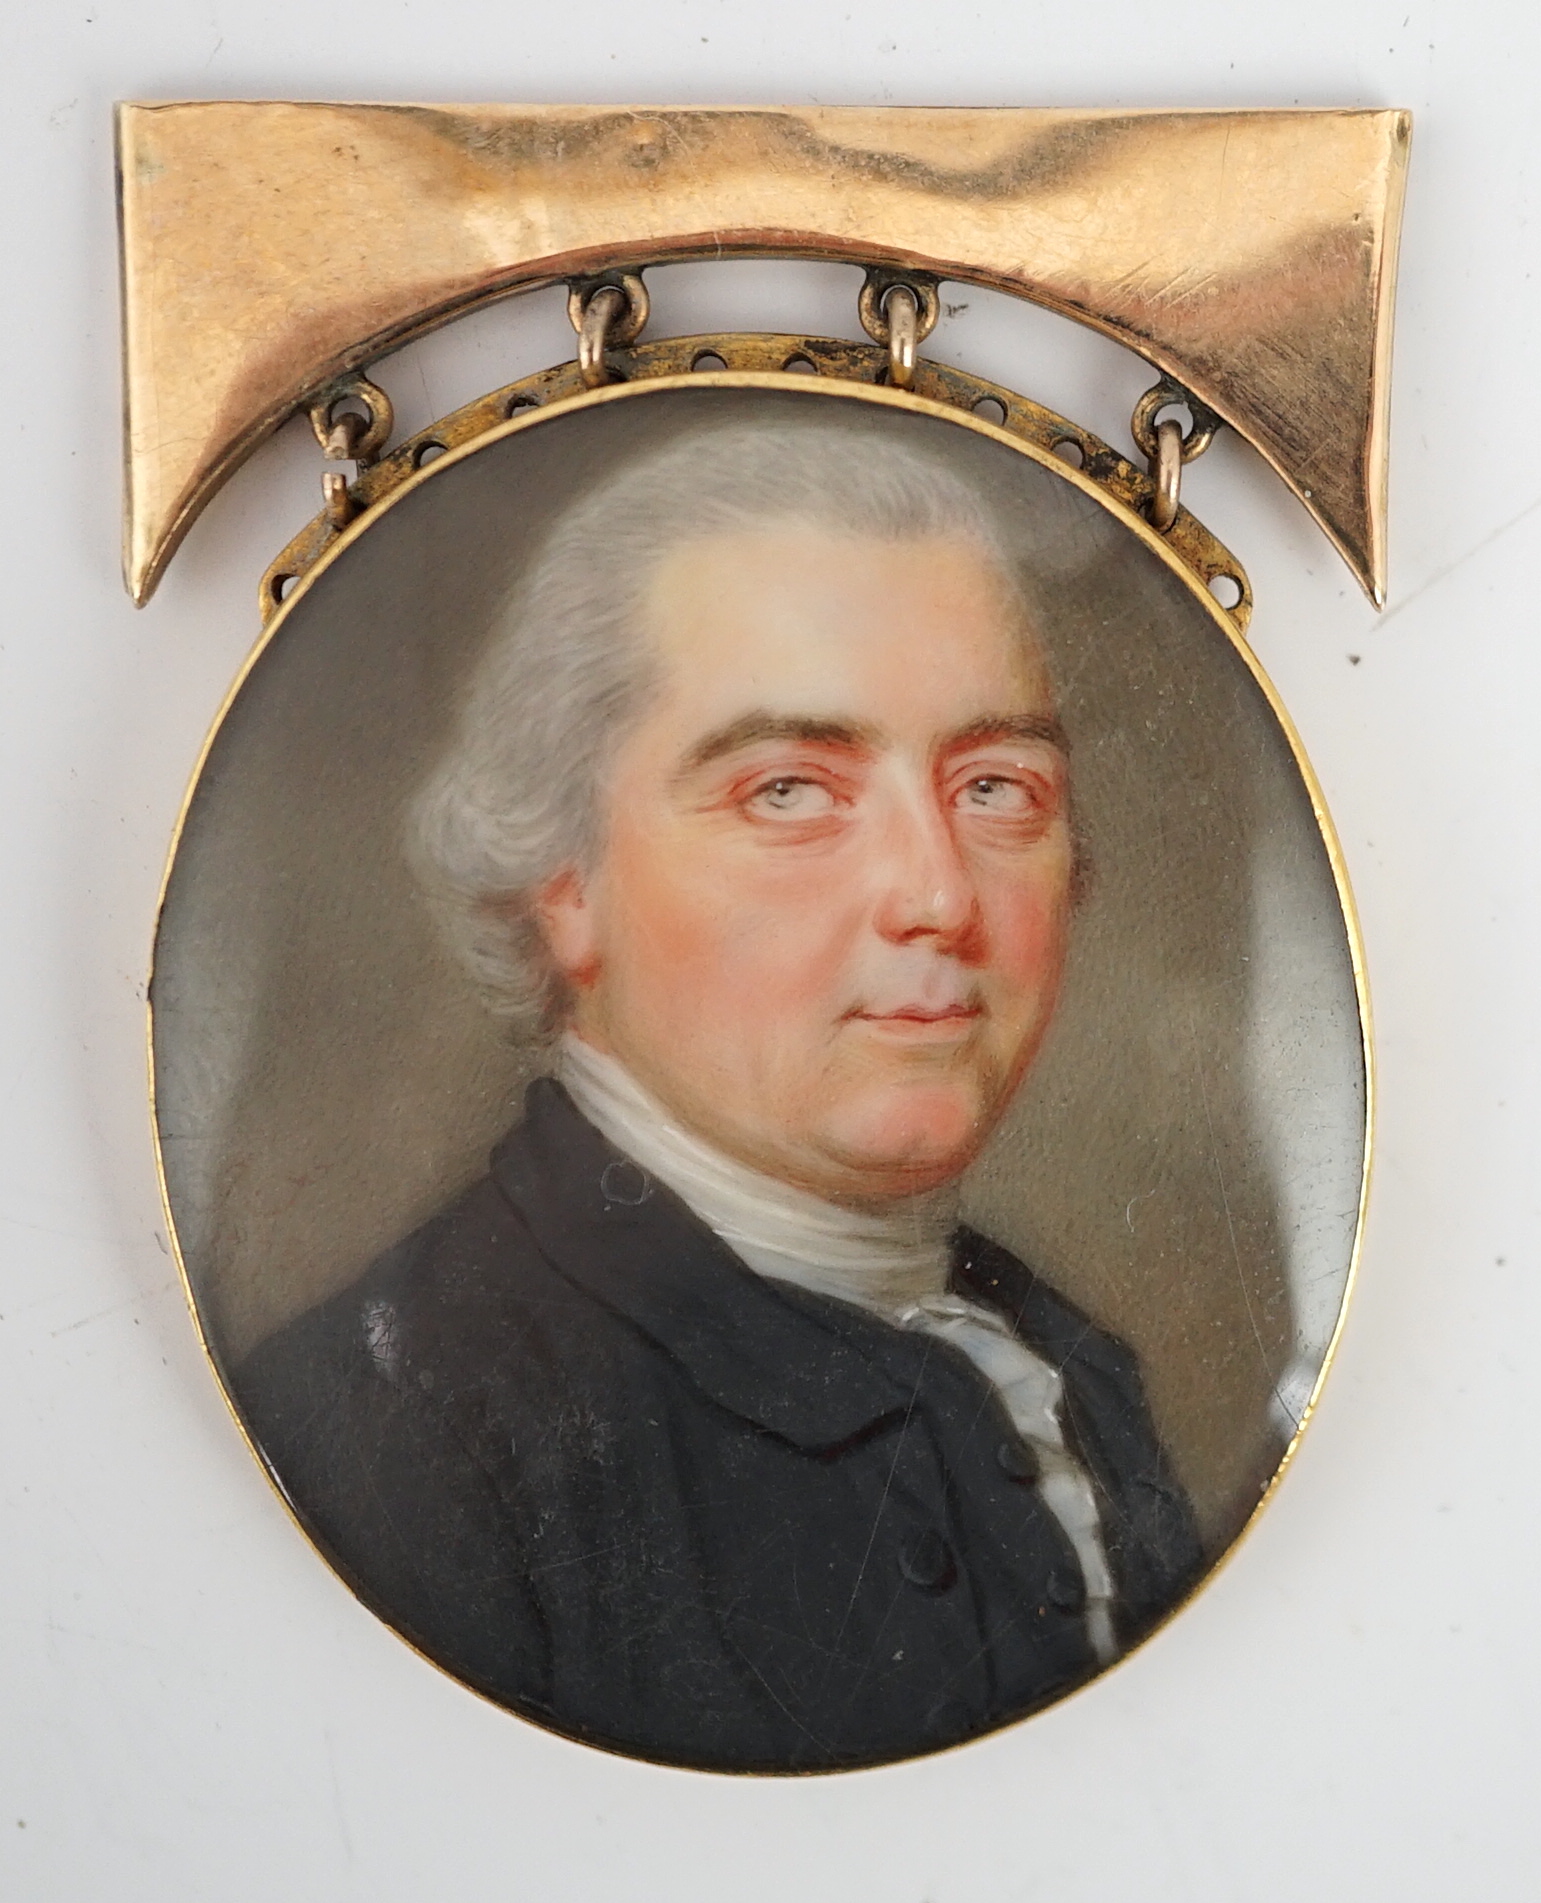 John Smart (British, 1742-1811), Portrait miniature of a gentleman, oil on ivory, 3.6 x 3.2cm. CITES Submission reference 3SWKABBR